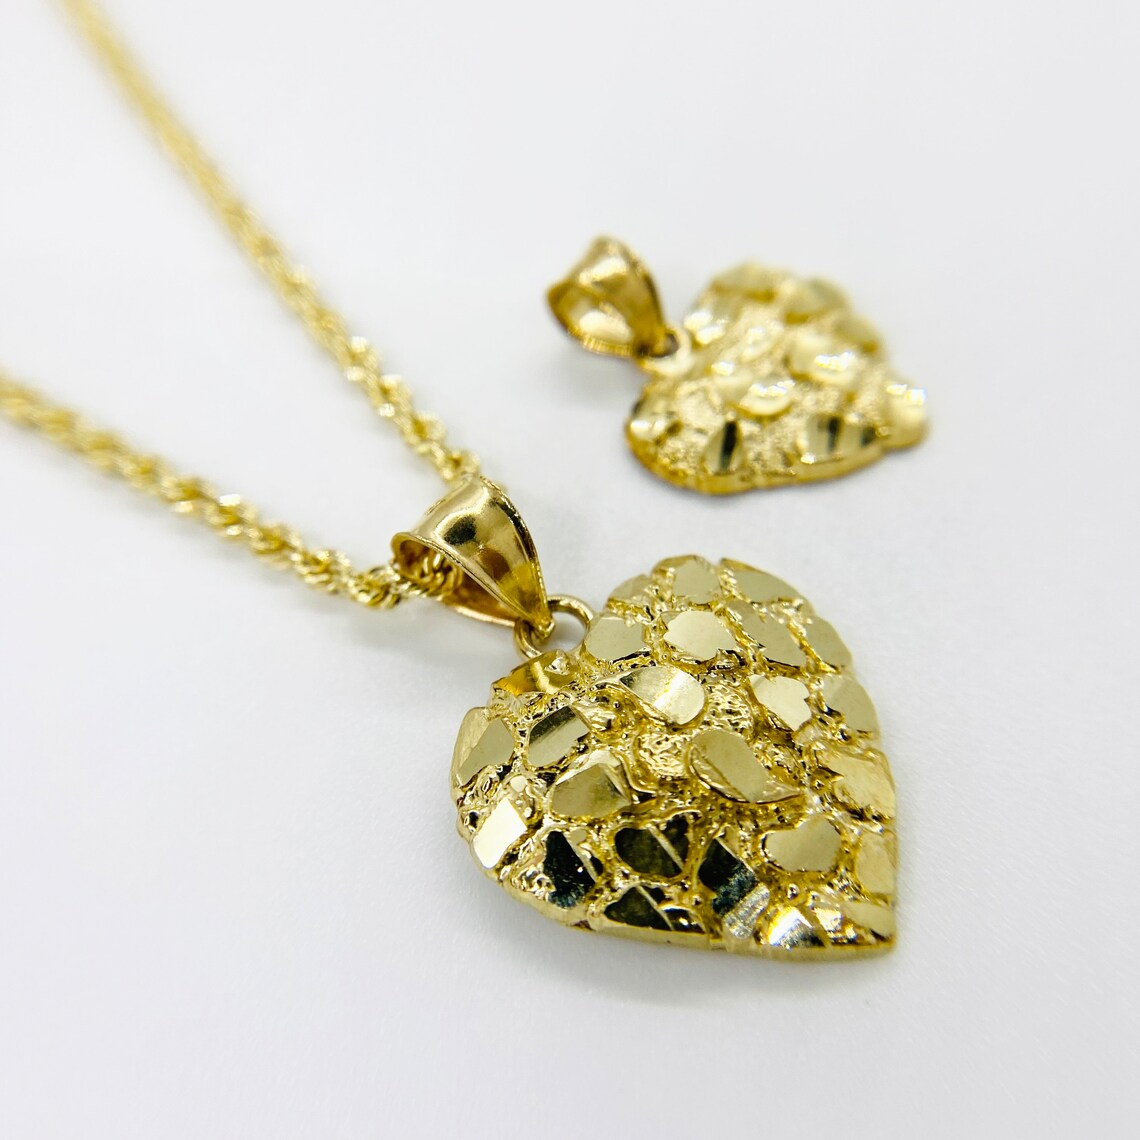 Solid Gold Nugget Heart Love Pendant Vintage Charm Necklace